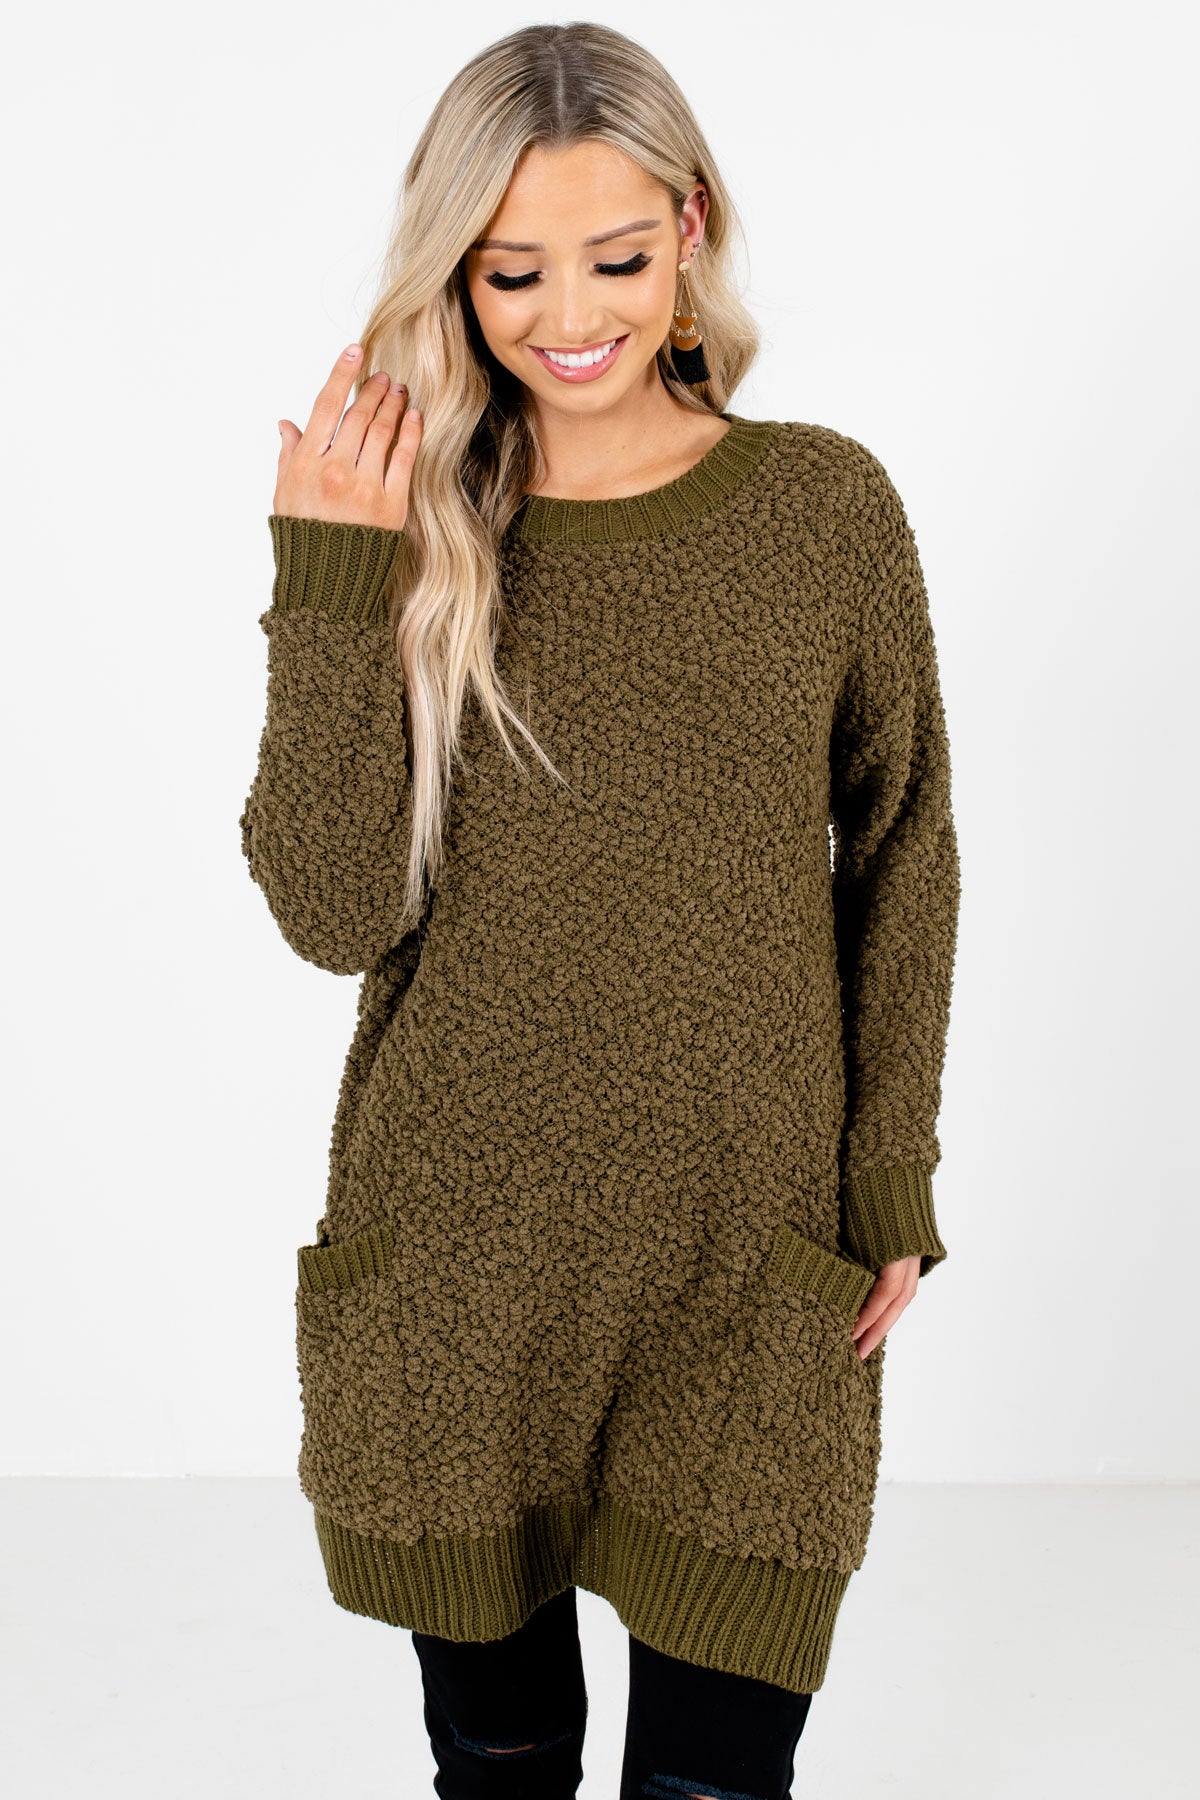 Olive Green High-Quality Popcorn Knit Material Boutique Sweaters for Women